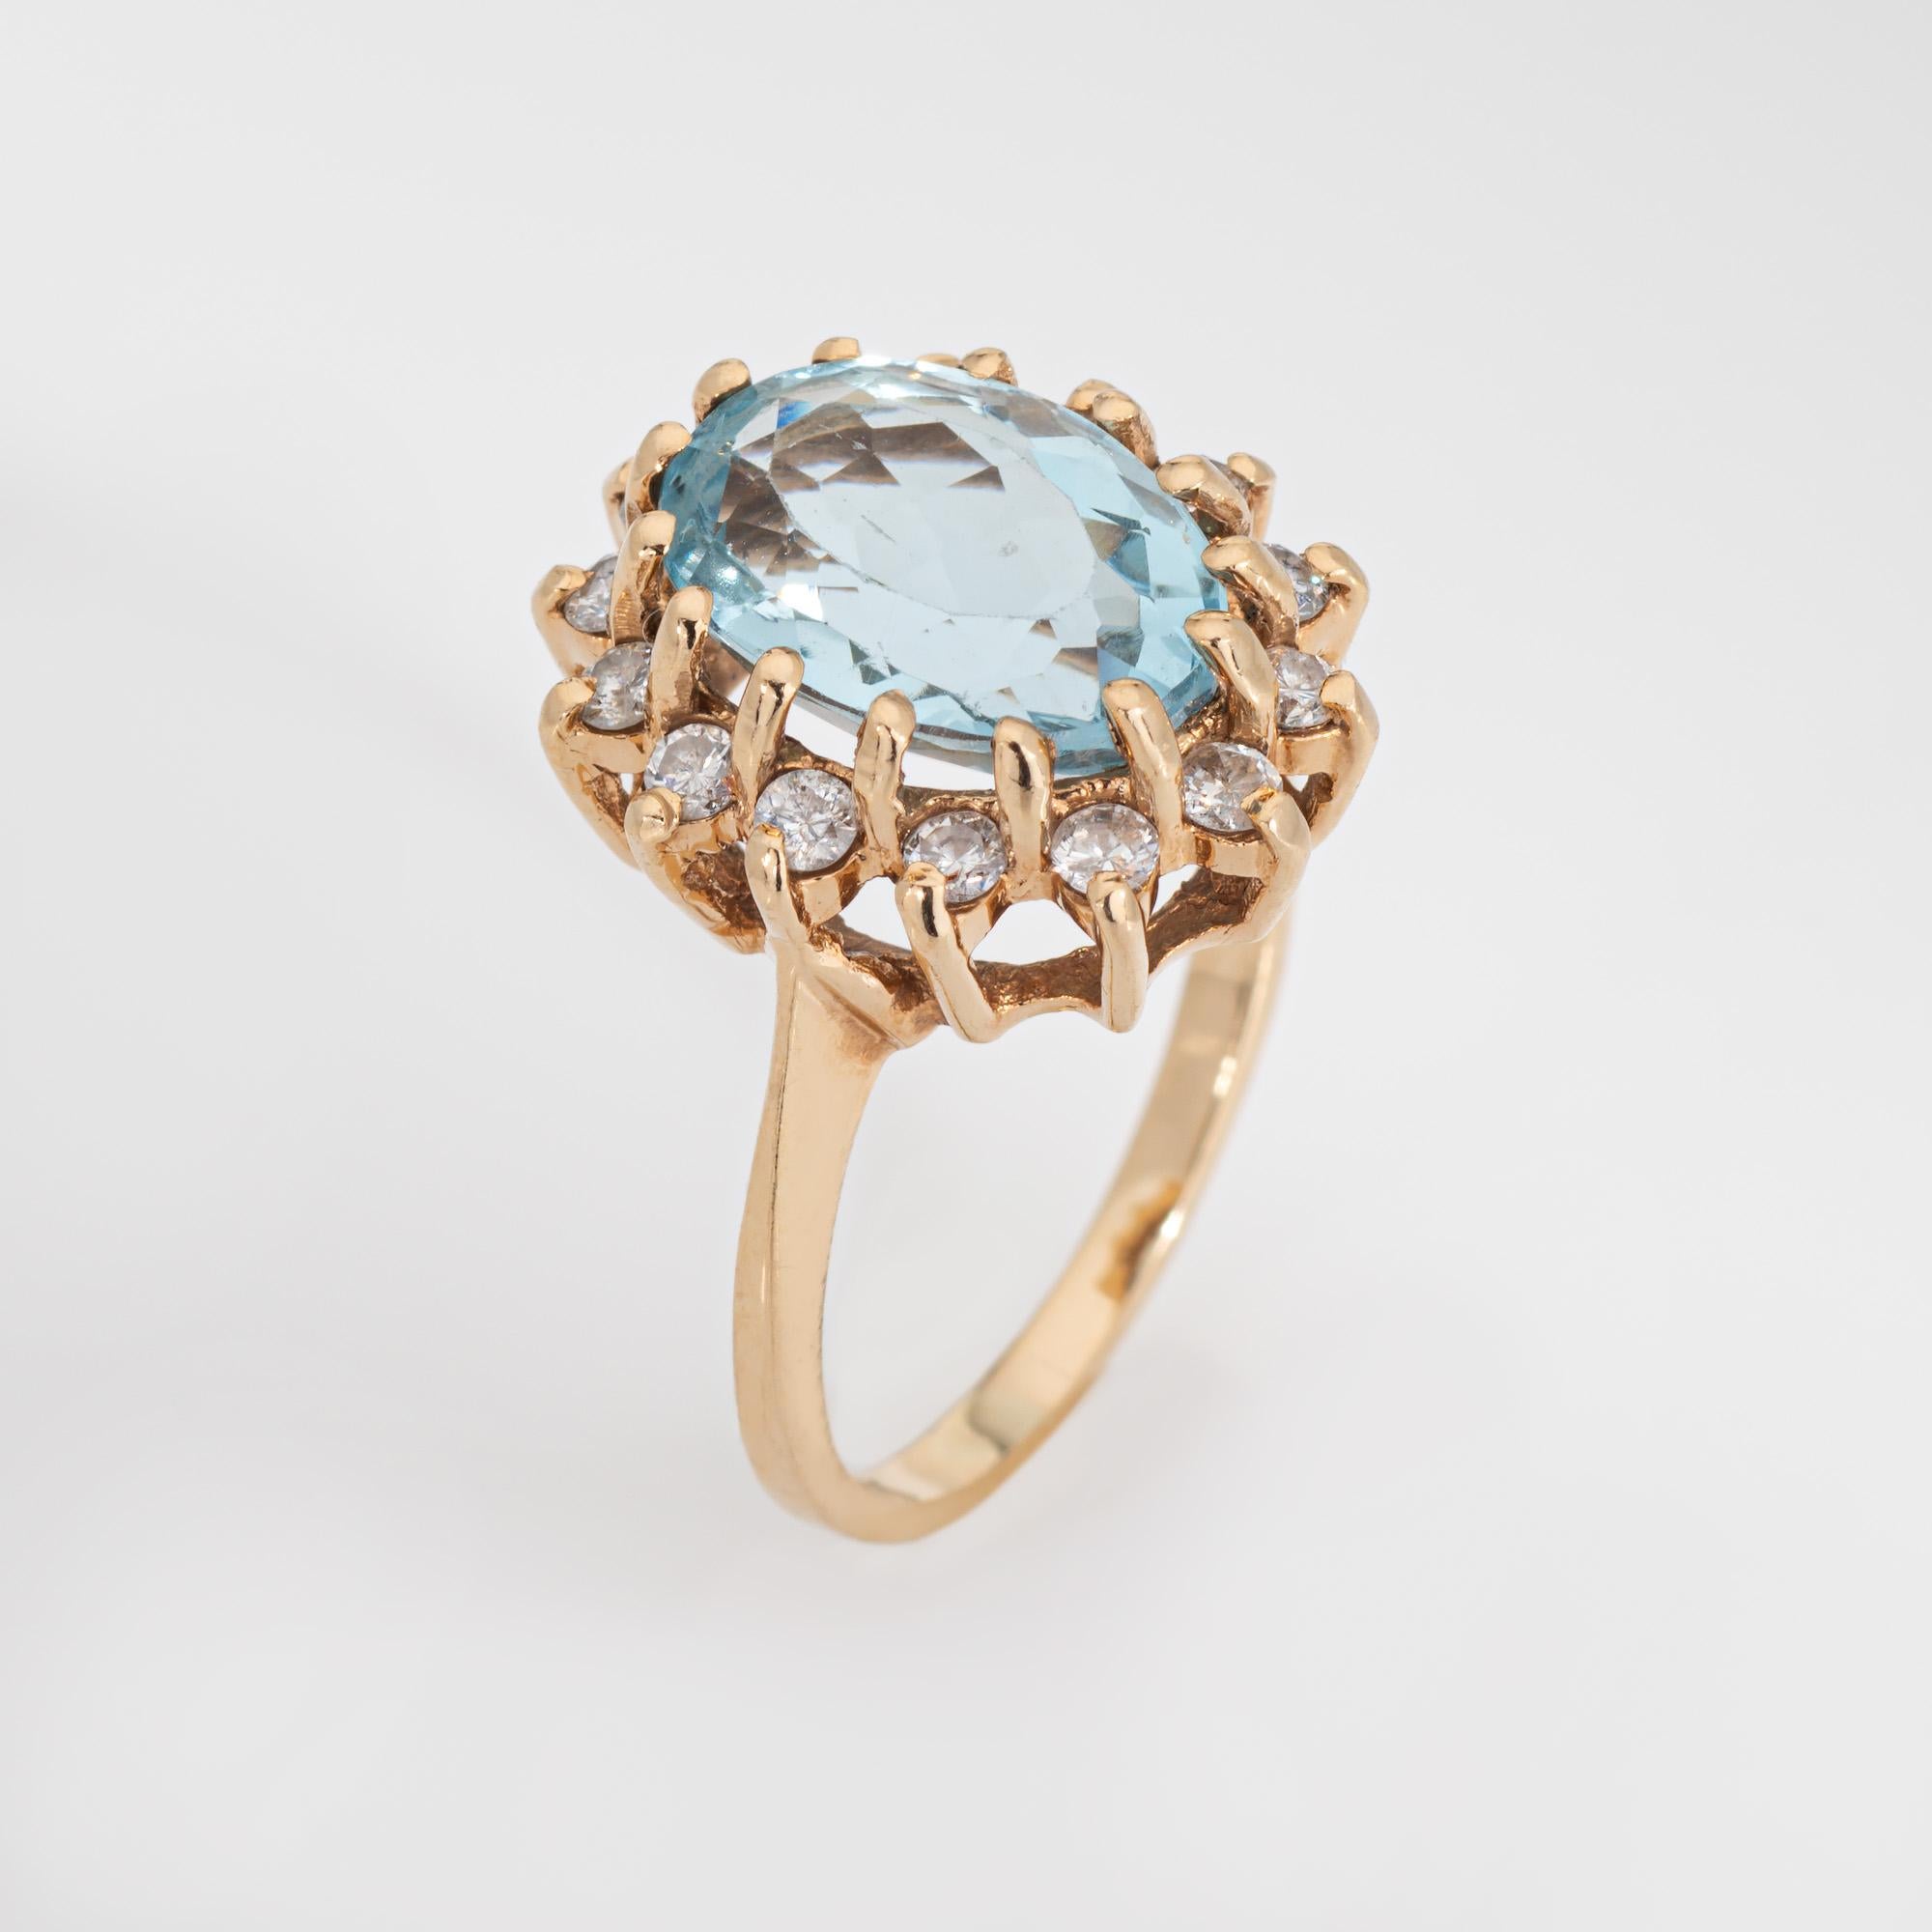 Stylish vintage aquamarine & diamond cocktail ring crafted in 14 karat yellow gold (circa 1980s). 

Oval faceted aquamarine measures 12mm x 8mm (estimated at 4.50 carats). 14 round brilliant cut diamonds total 0.28 carats (estimated at I-J color and